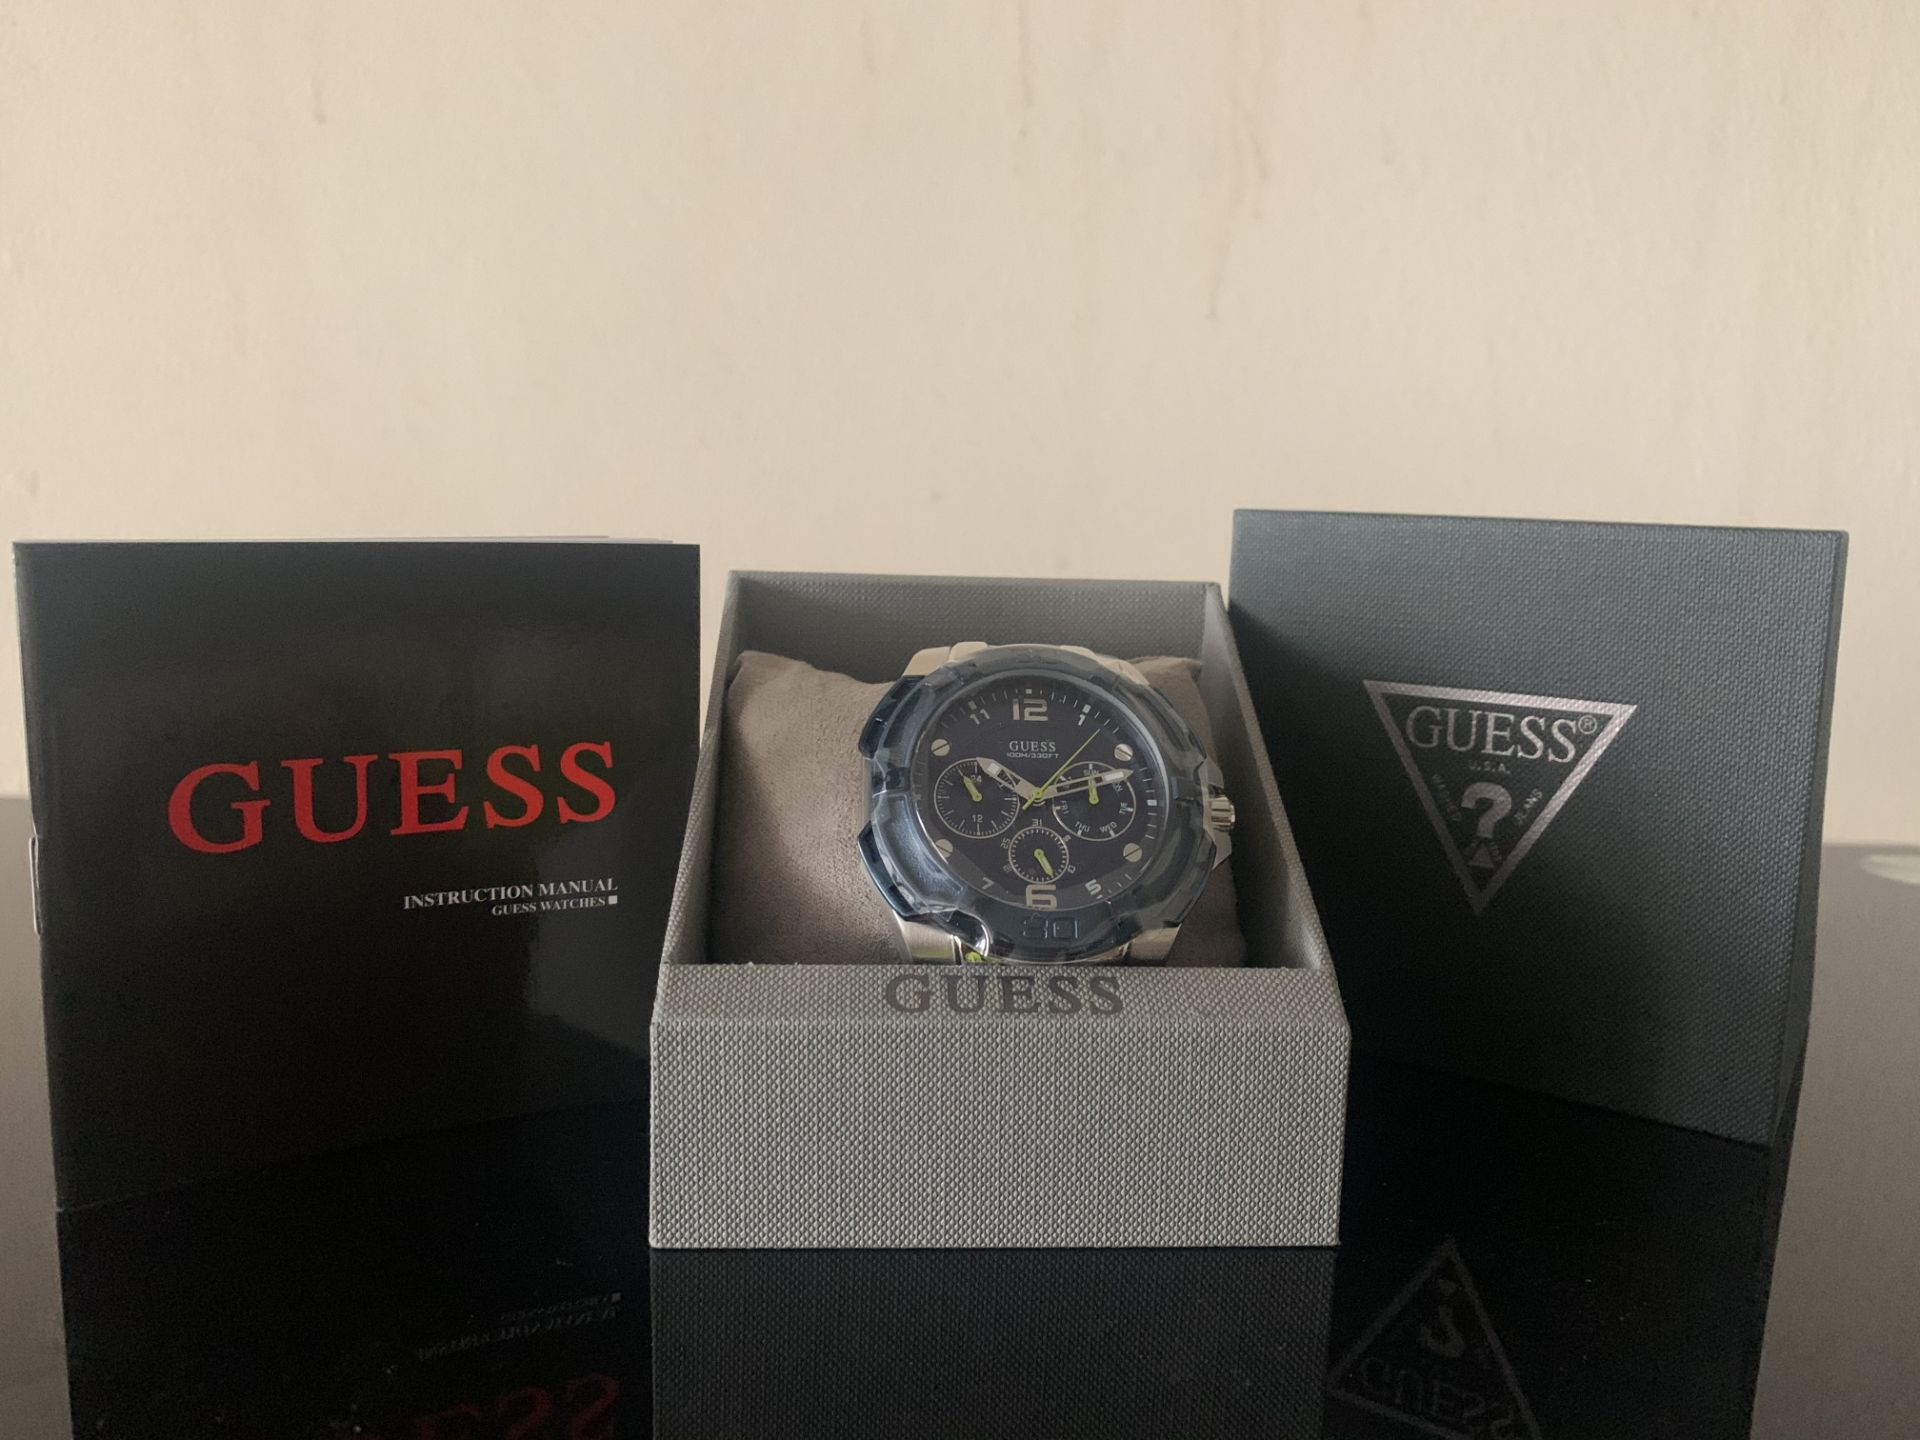 BRAND NEW RETAIL BOXED MENS GUESS WATCH RRP £279 - Image 2 of 2